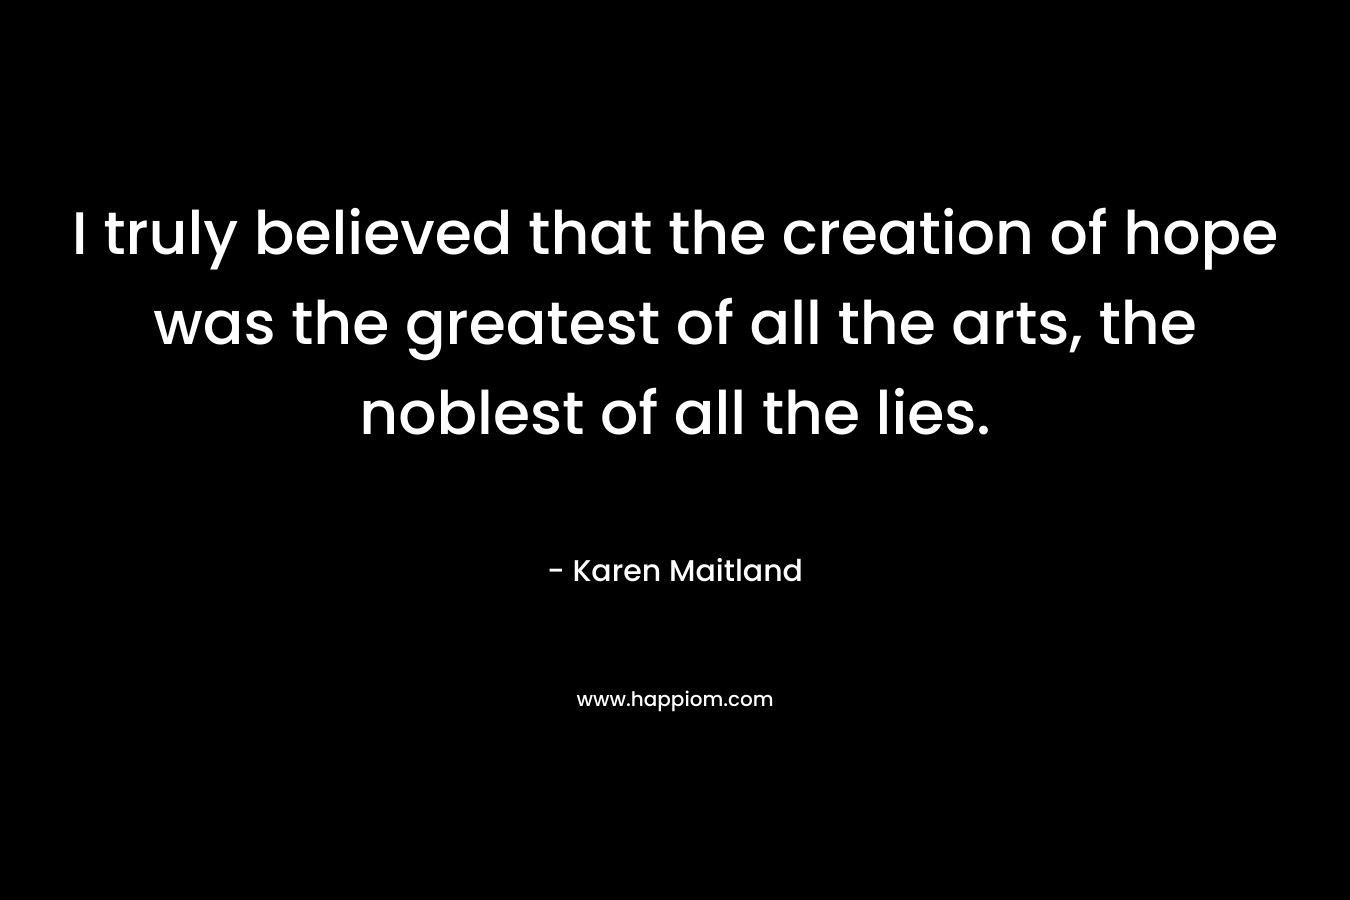 I truly believed that the creation of hope was the greatest of all the arts, the noblest of all the lies. – Karen Maitland